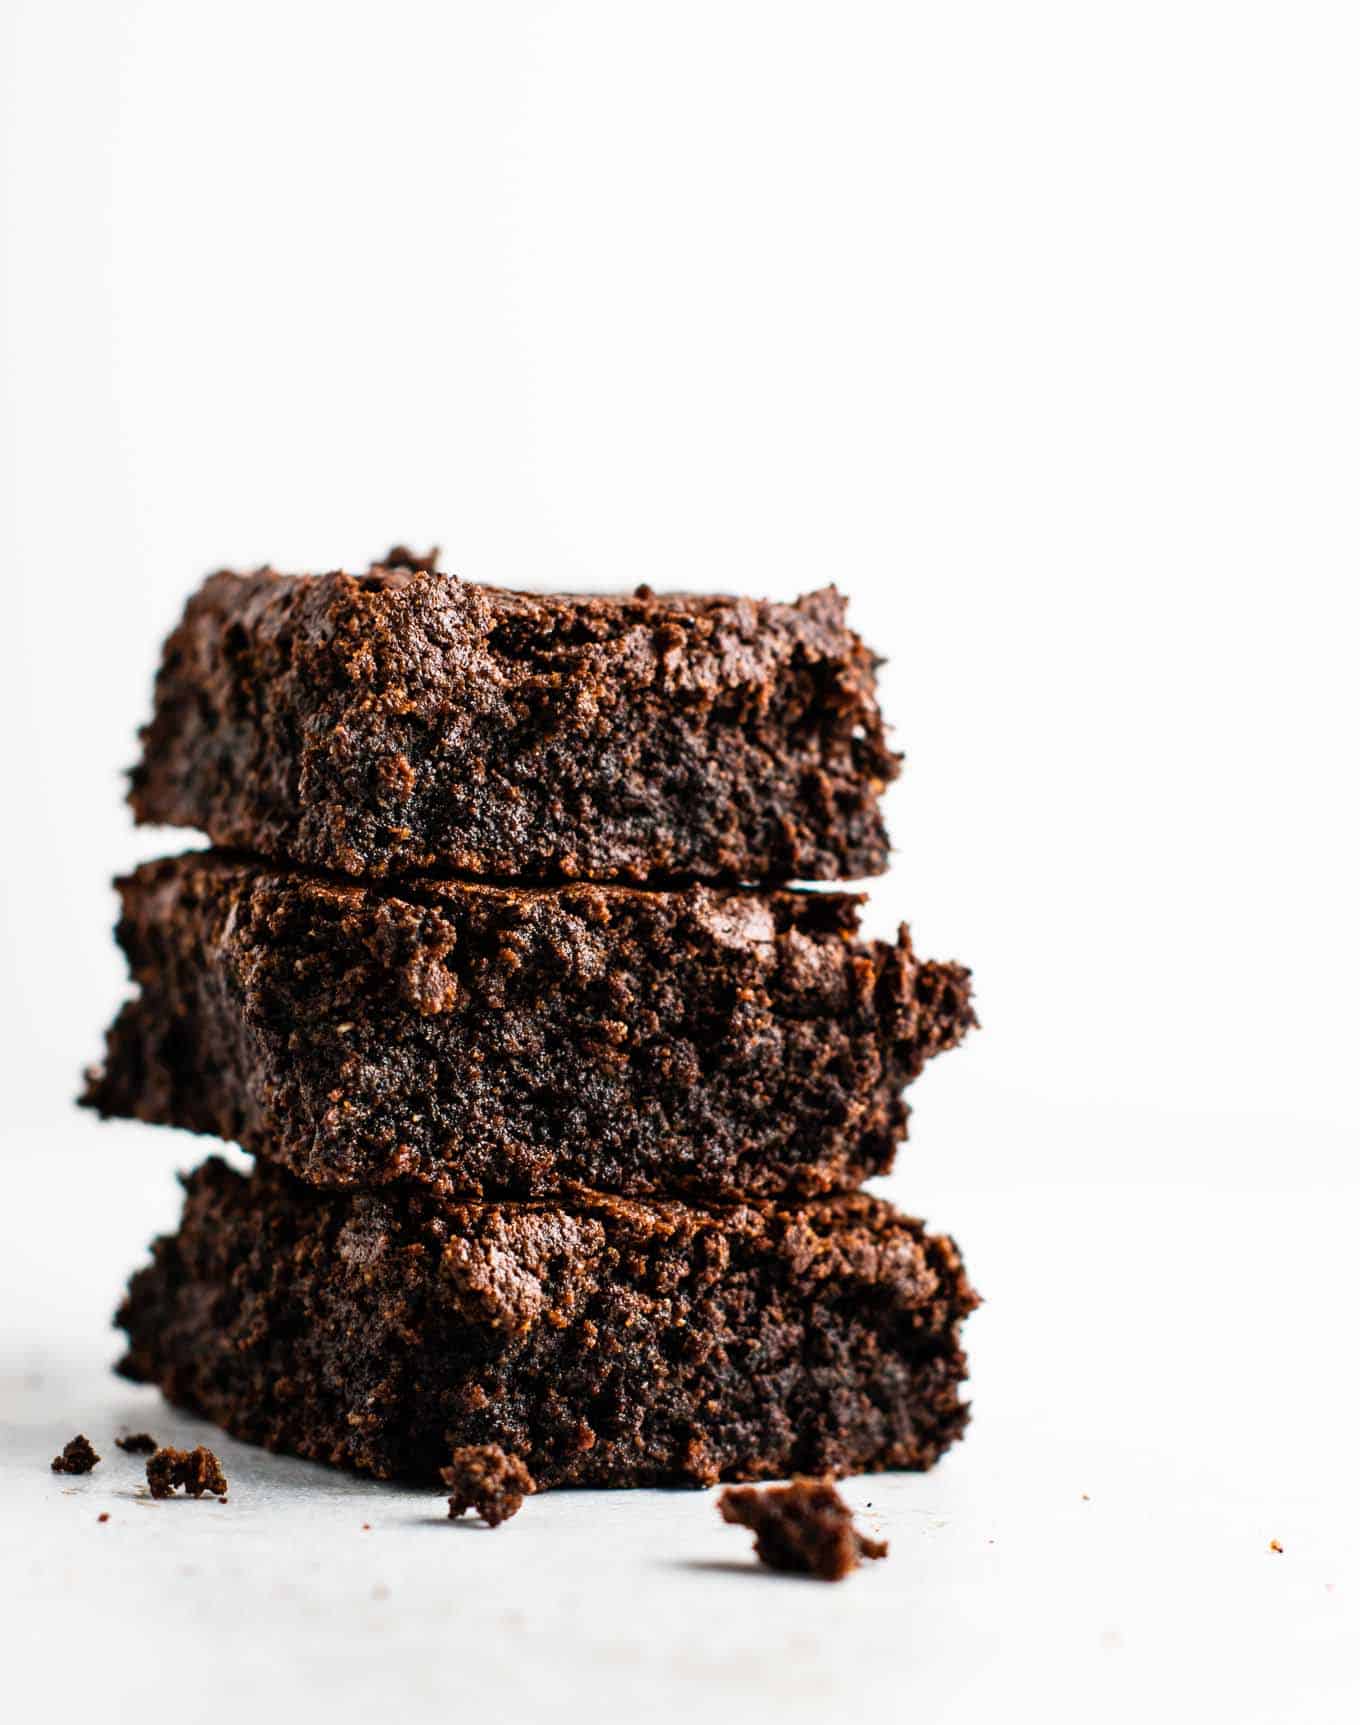 Easy gluten free dairy free brownies made with oat flour and coconut flour. Fudgy, and taste amazing! #glutenfreebrownies #glutenfree #glutenfreedessert #dessert #brownies #oatflour #coconutflour